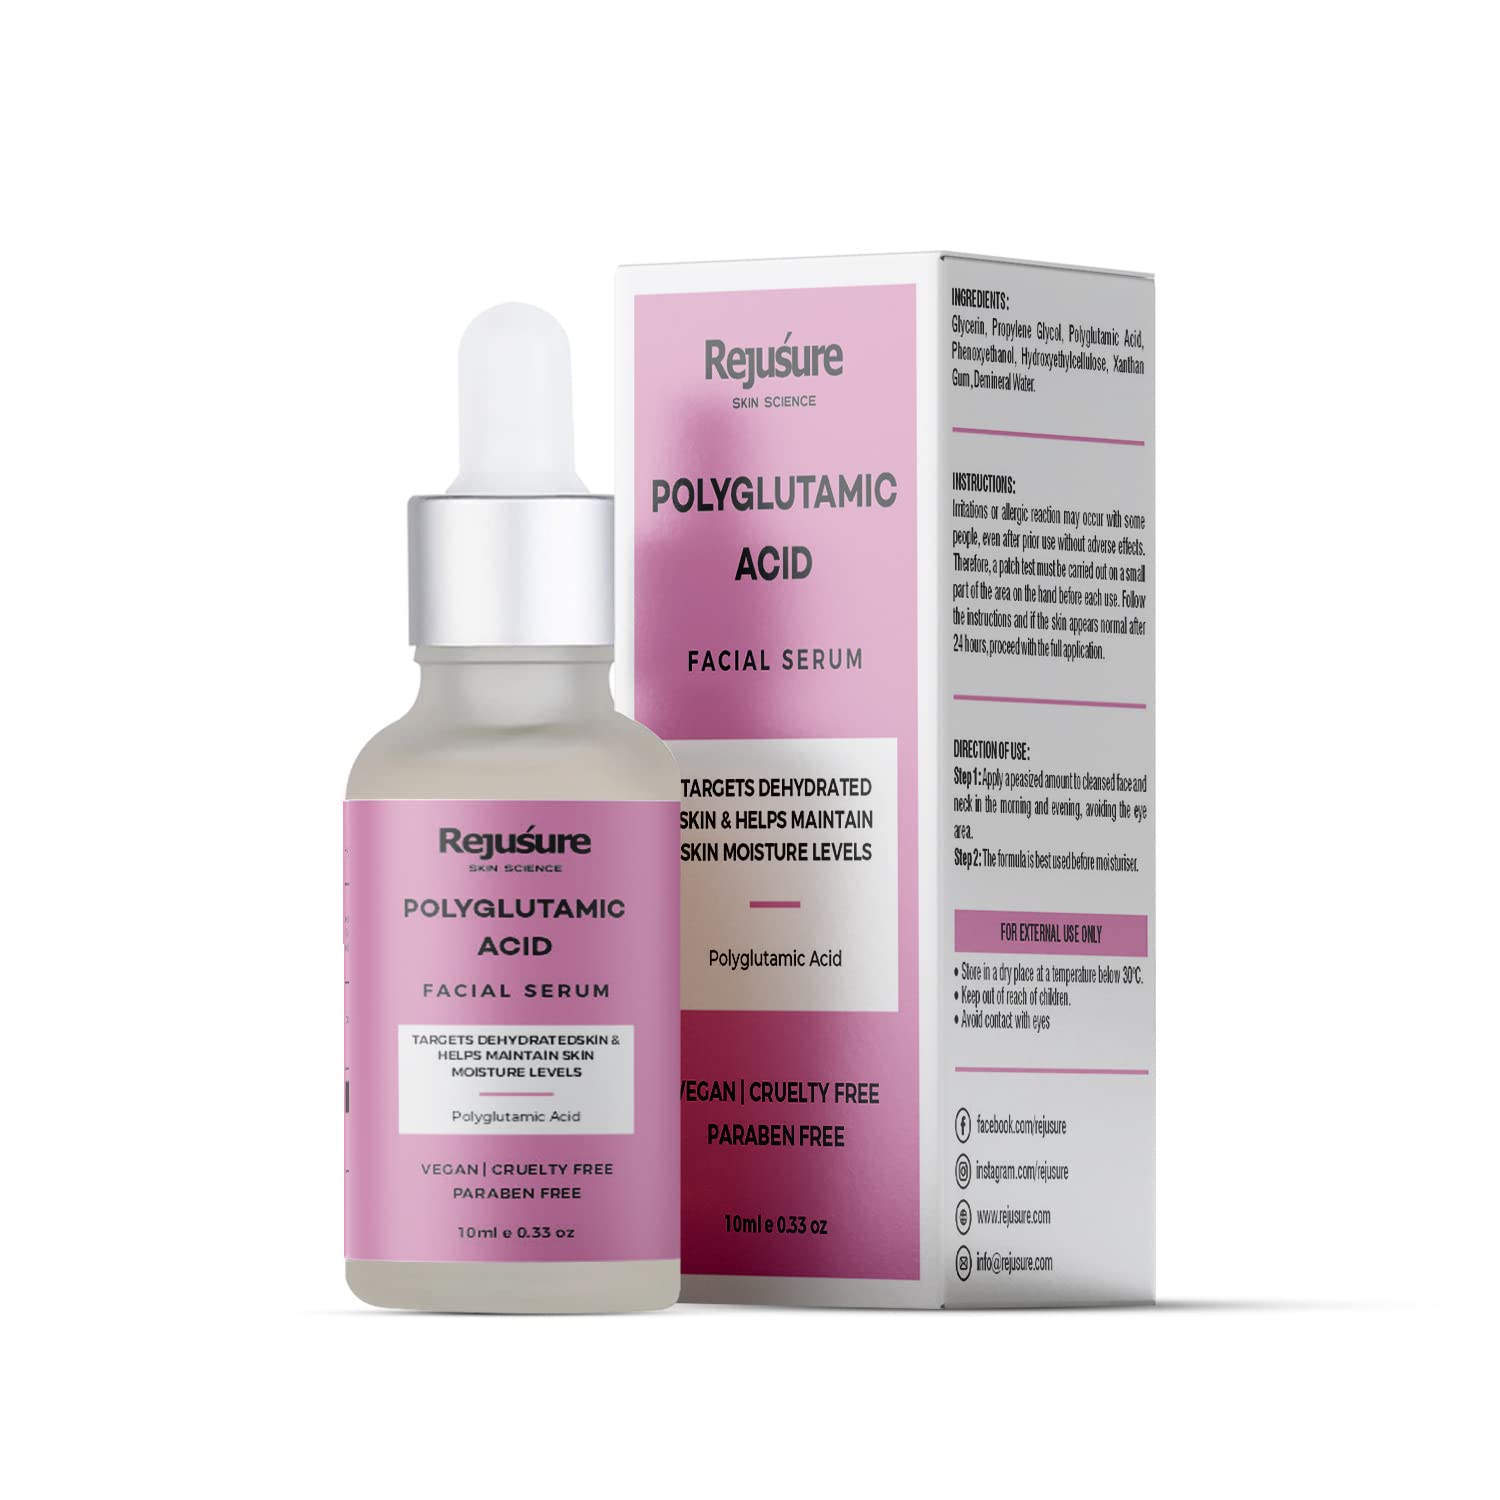 Rejusure Polyglutamic Acid Face Serum Targets Dehydrated Skin & Helps Maintain Skin Moisture Levels | For Men & Women | Cruelty Free & Dermatologist Tested – 10ml